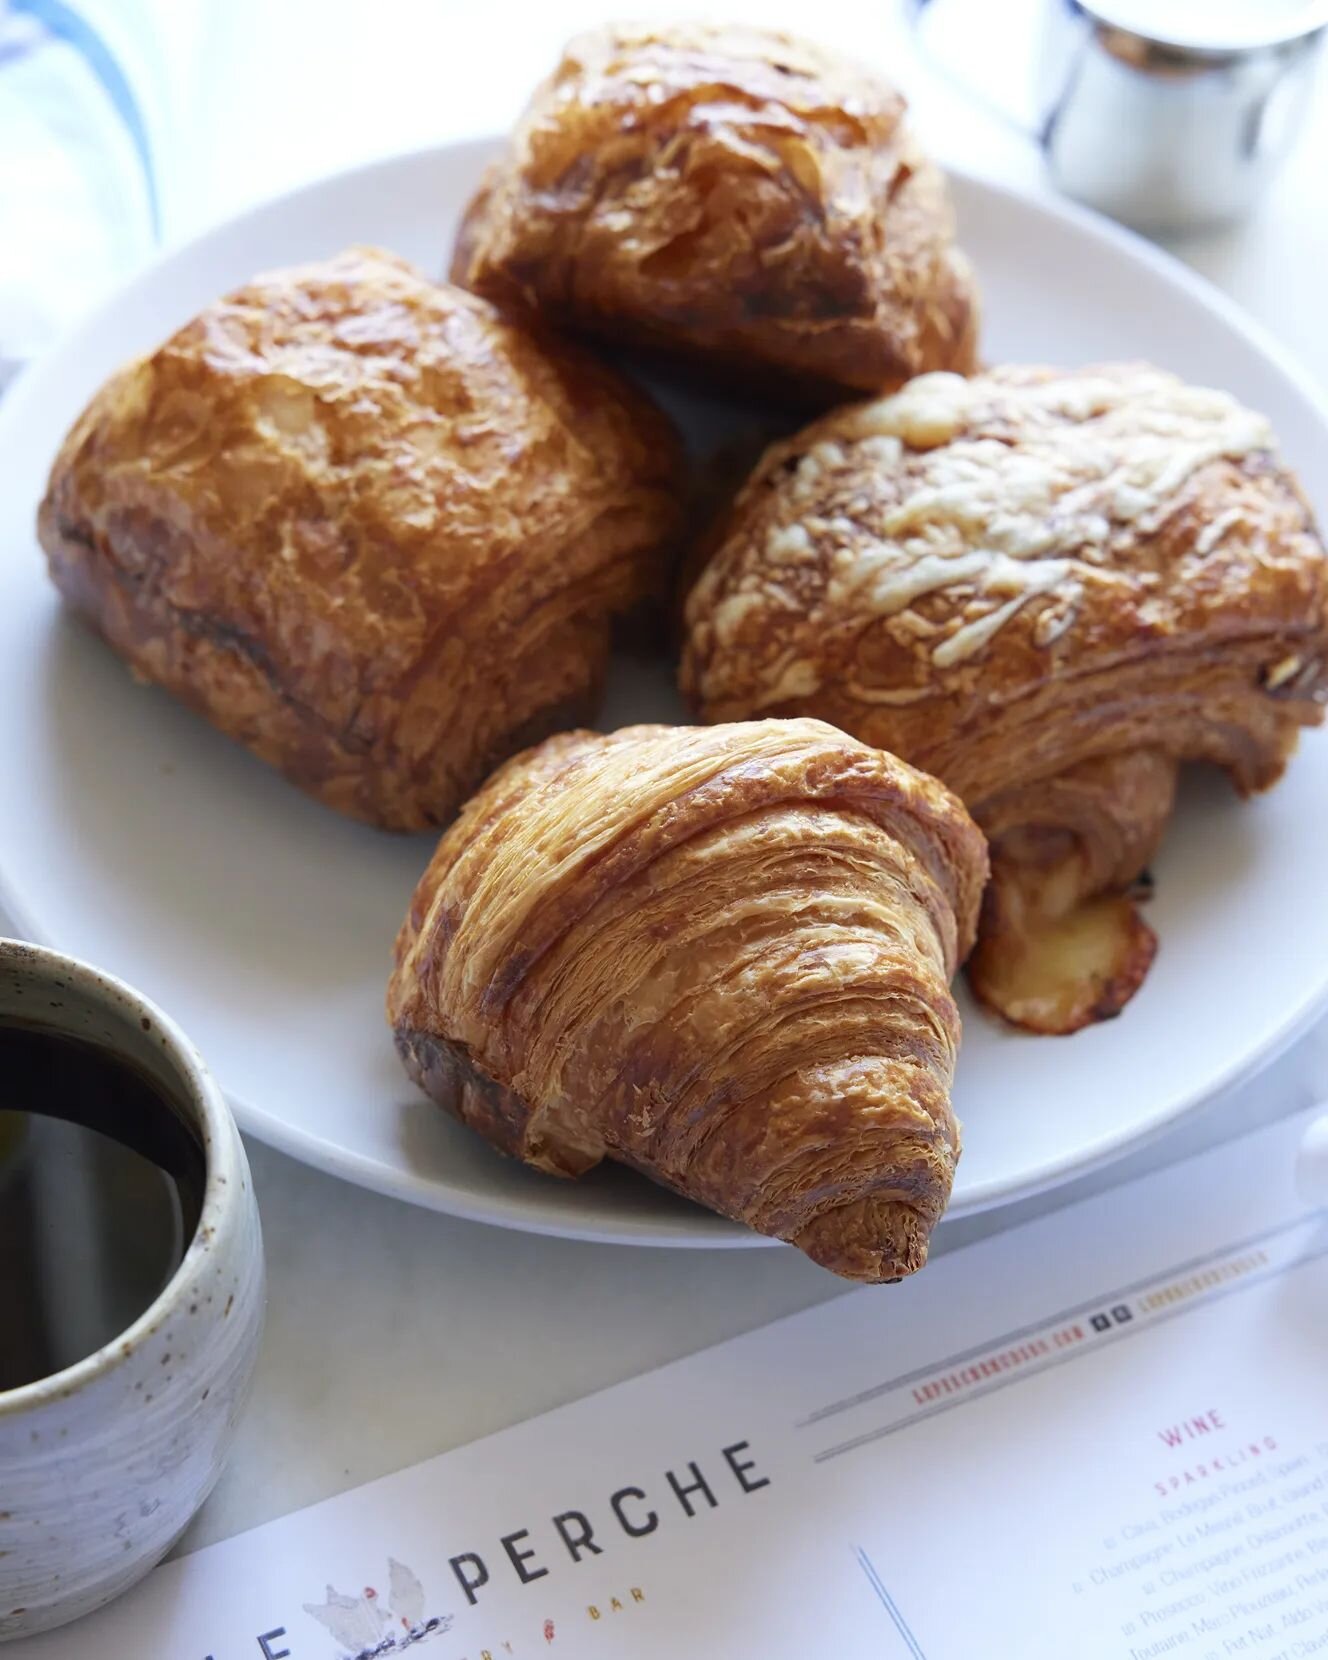 {Les viennoiseries}

The &quot;basics&quot; at Le Perche, baked fresh daily 🥐

Book your table on #Resy!
.
.
#leperchehudson #hudsonvalley #hudsonny #daytimeeatery #breakfast #breakfastgoals #brunch #lunch #frenchtwist #restaurantswithfireplaces #co